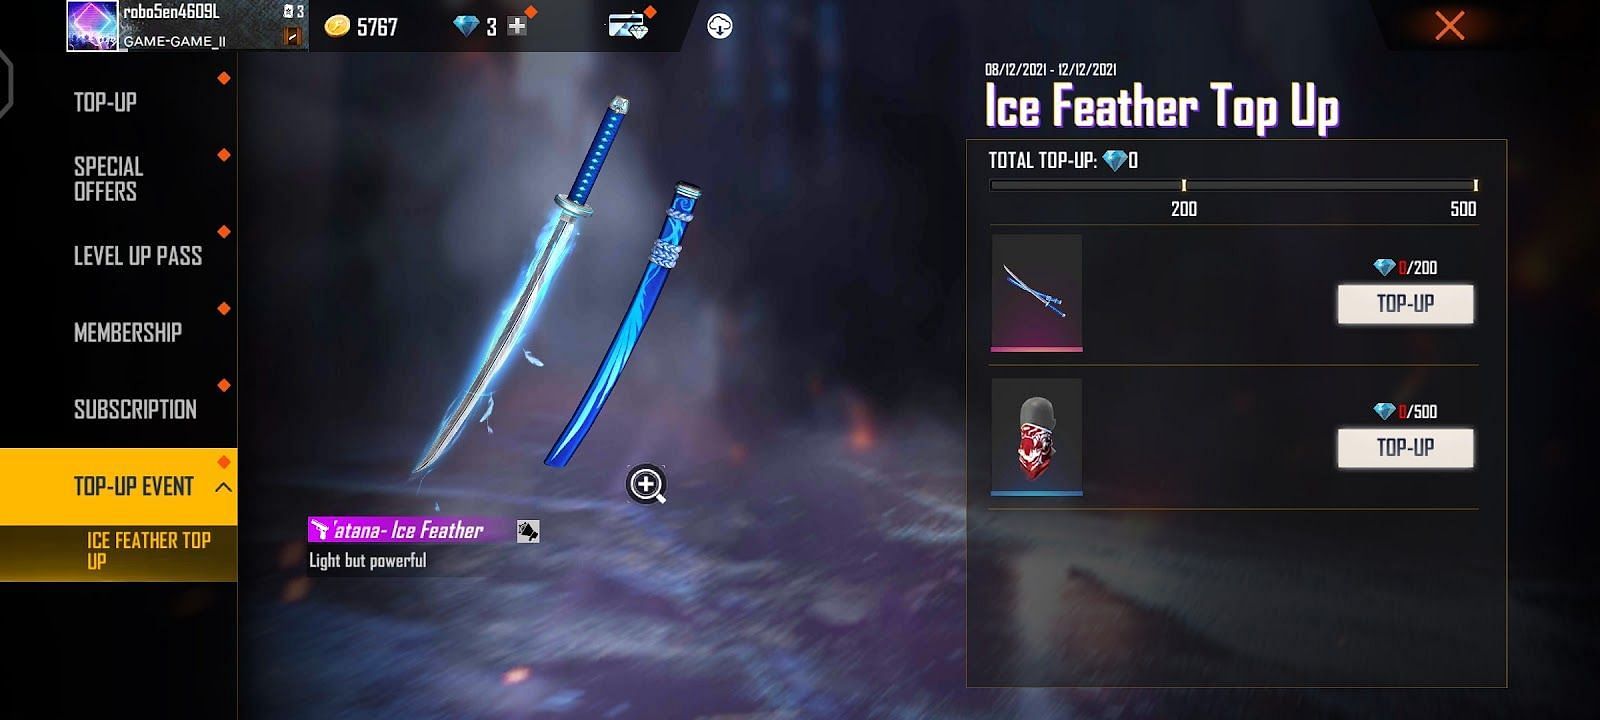 Ice feather Top-up event (Image via Garena)